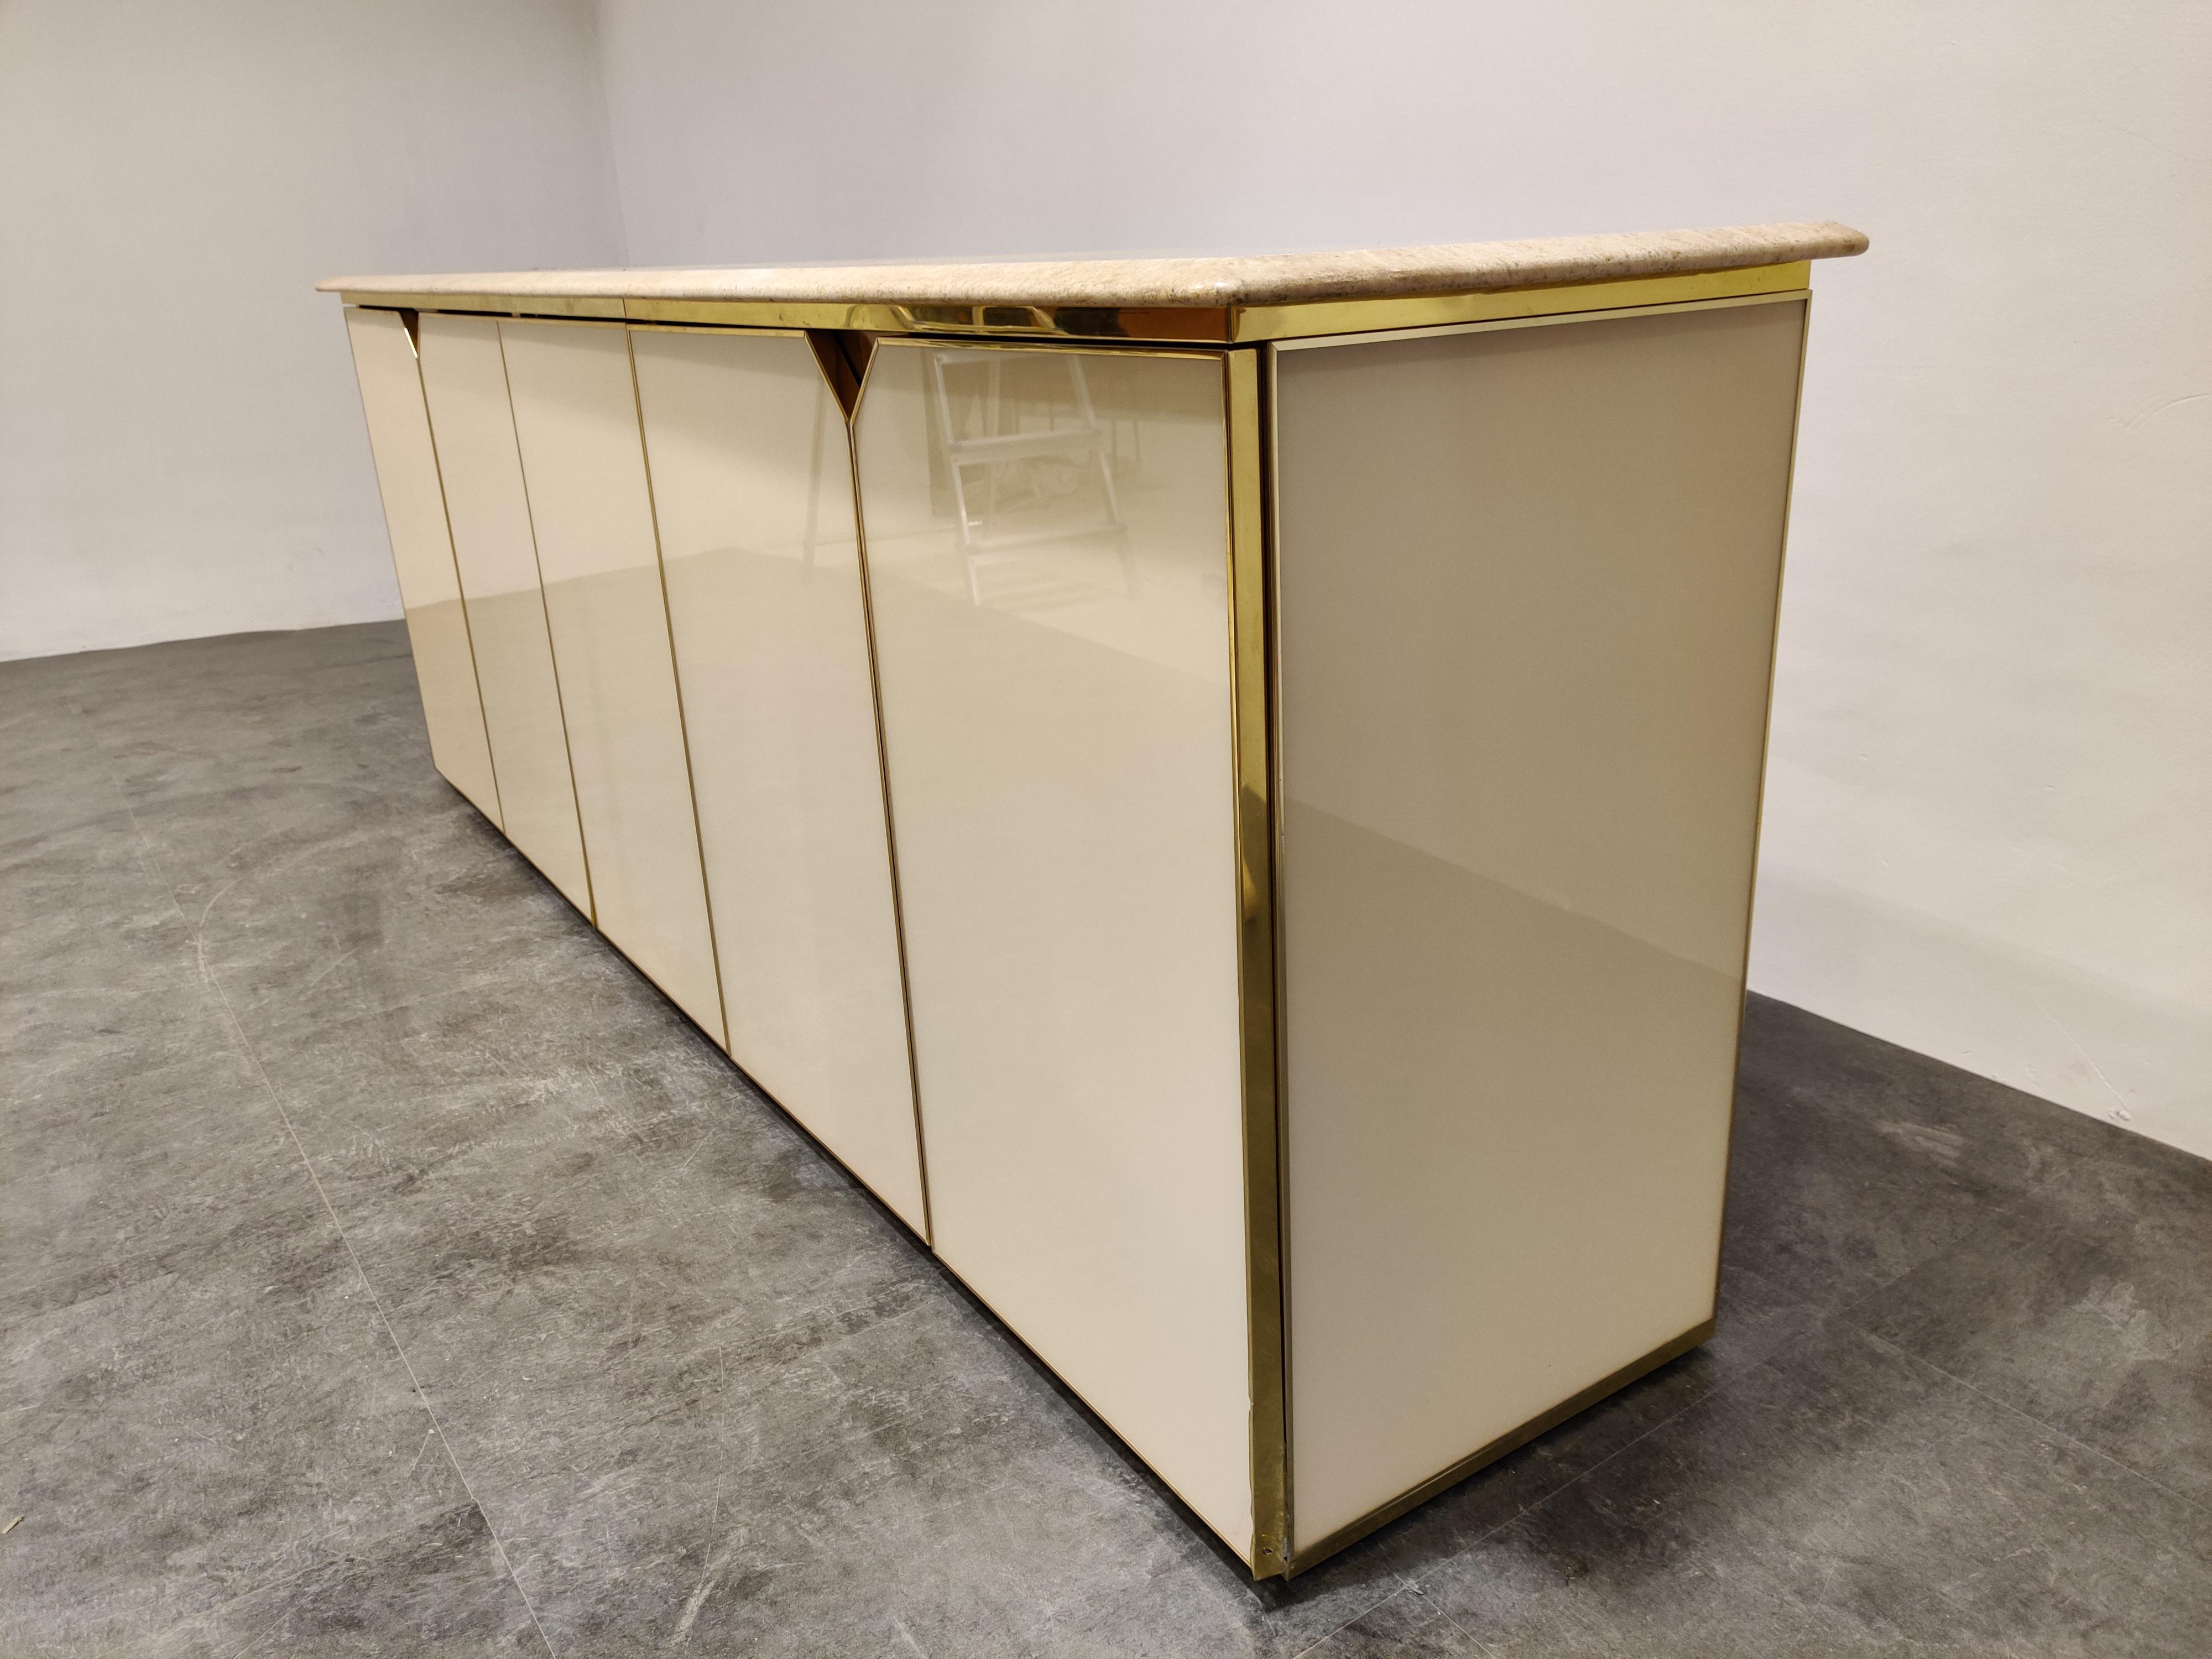 Luxurious brass lacquered credenza with a beautiful travertine stone top.

The doors have a brass finish, giving the cabinet a luxurious appeal.

The credenza consists of five doors and offer enough storage space.

Good overall condition, the